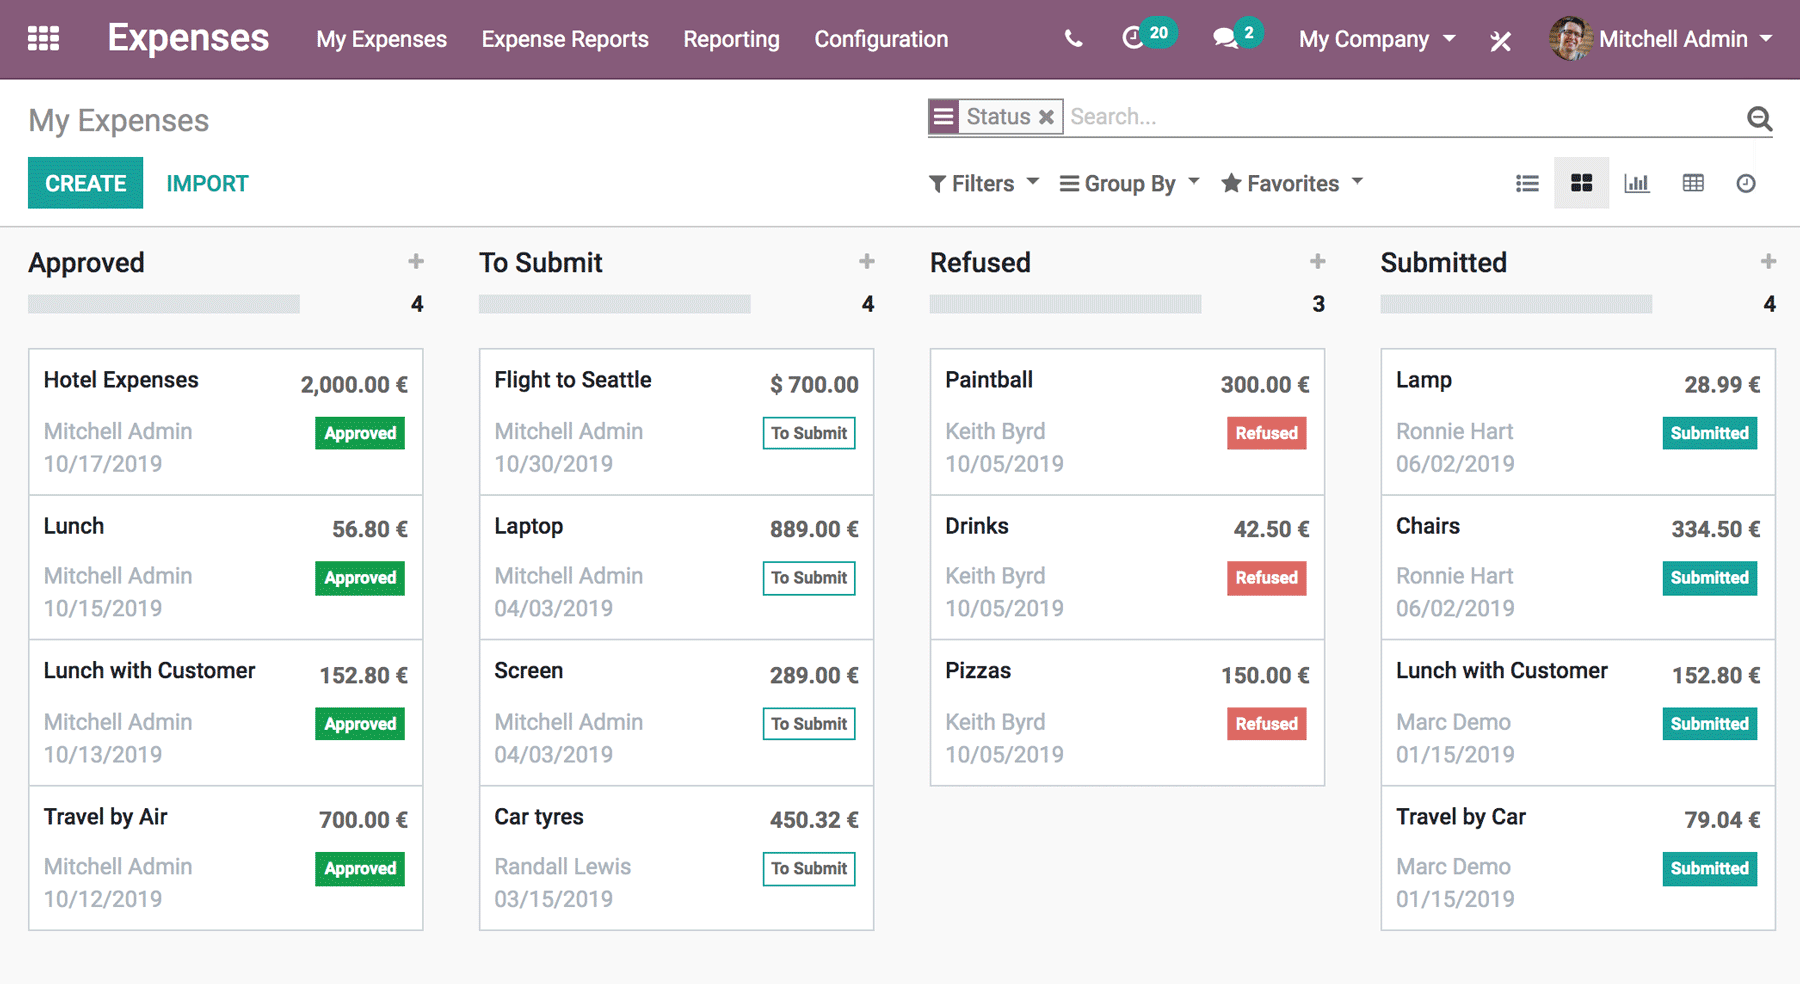 odoo expenses - Expenses Management APP